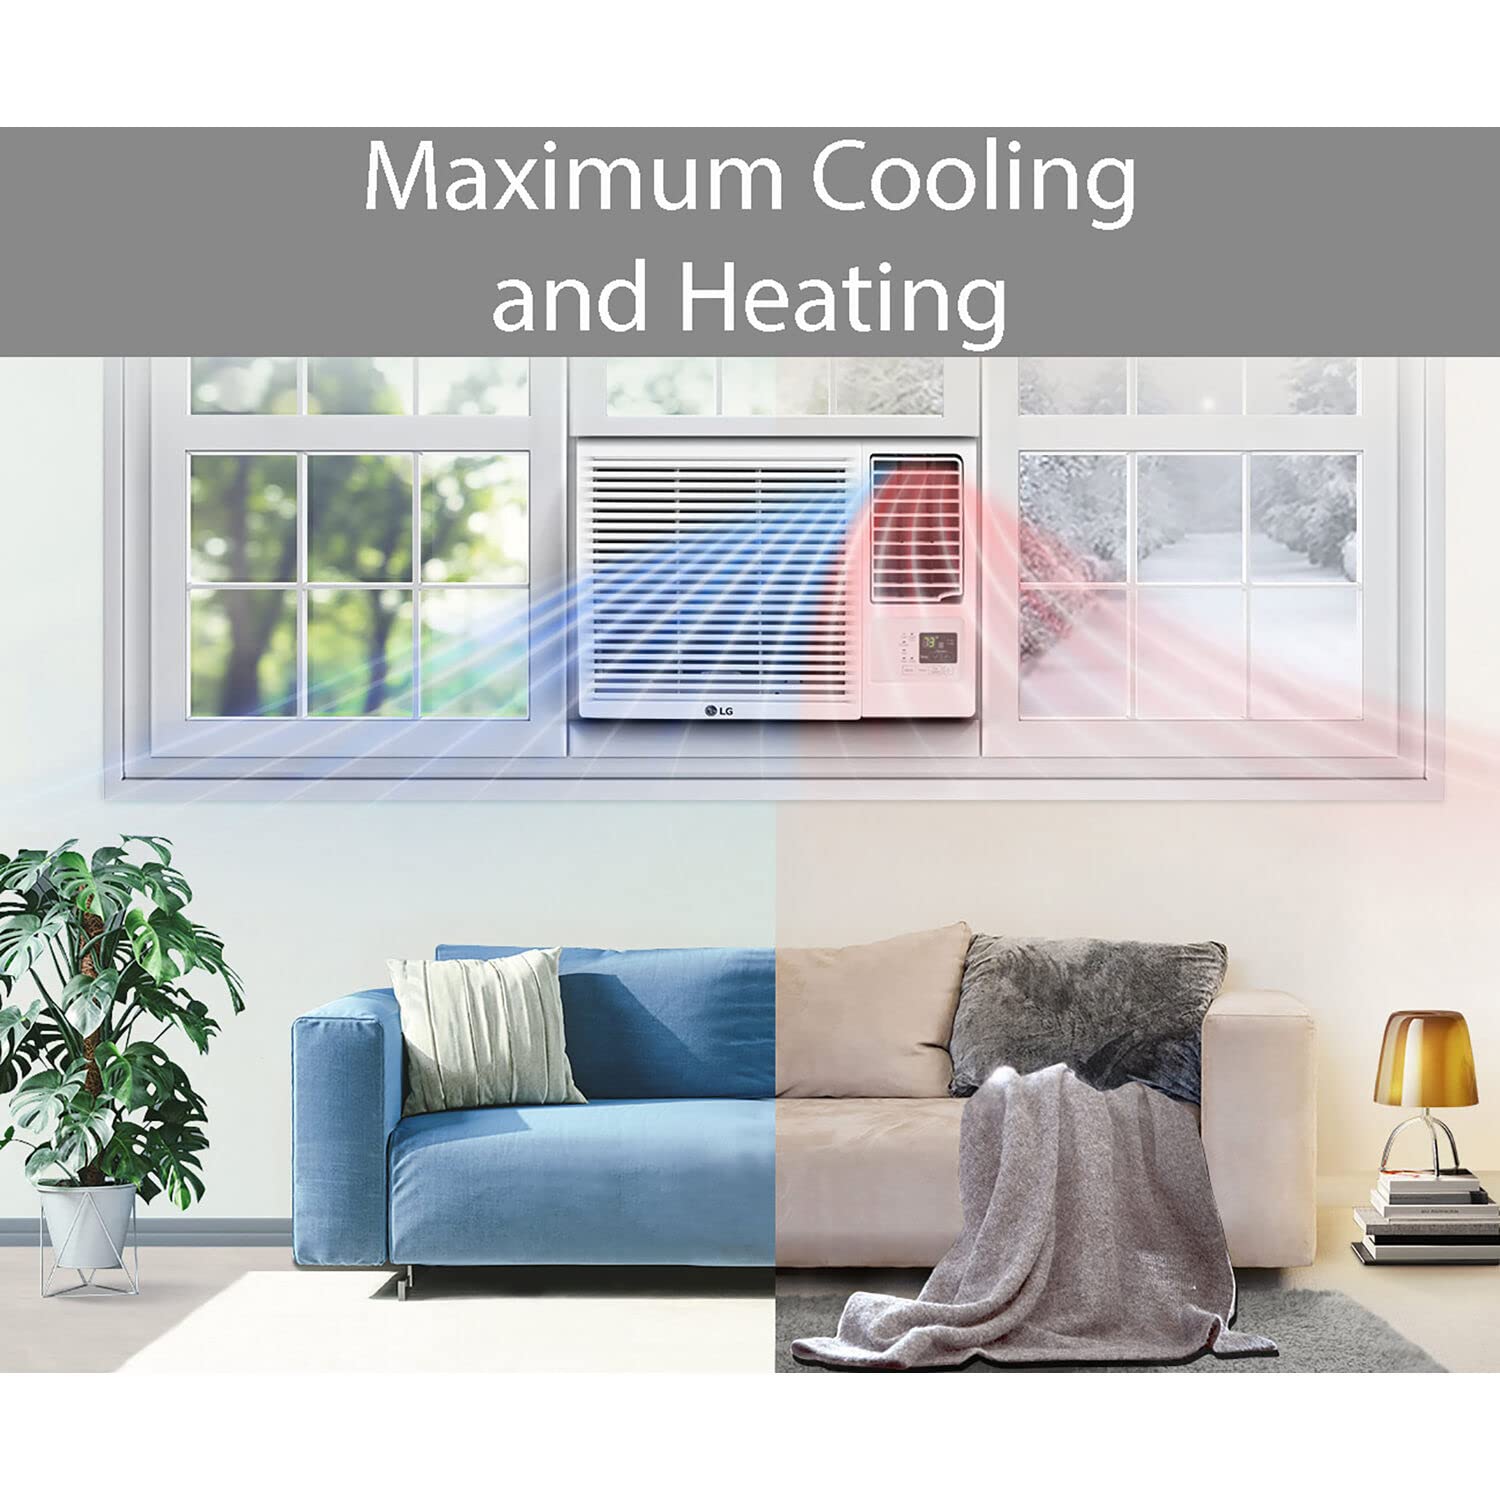 LG 8,000 BTU Heat and Cool Window Air Conditioner with Wifi Controls